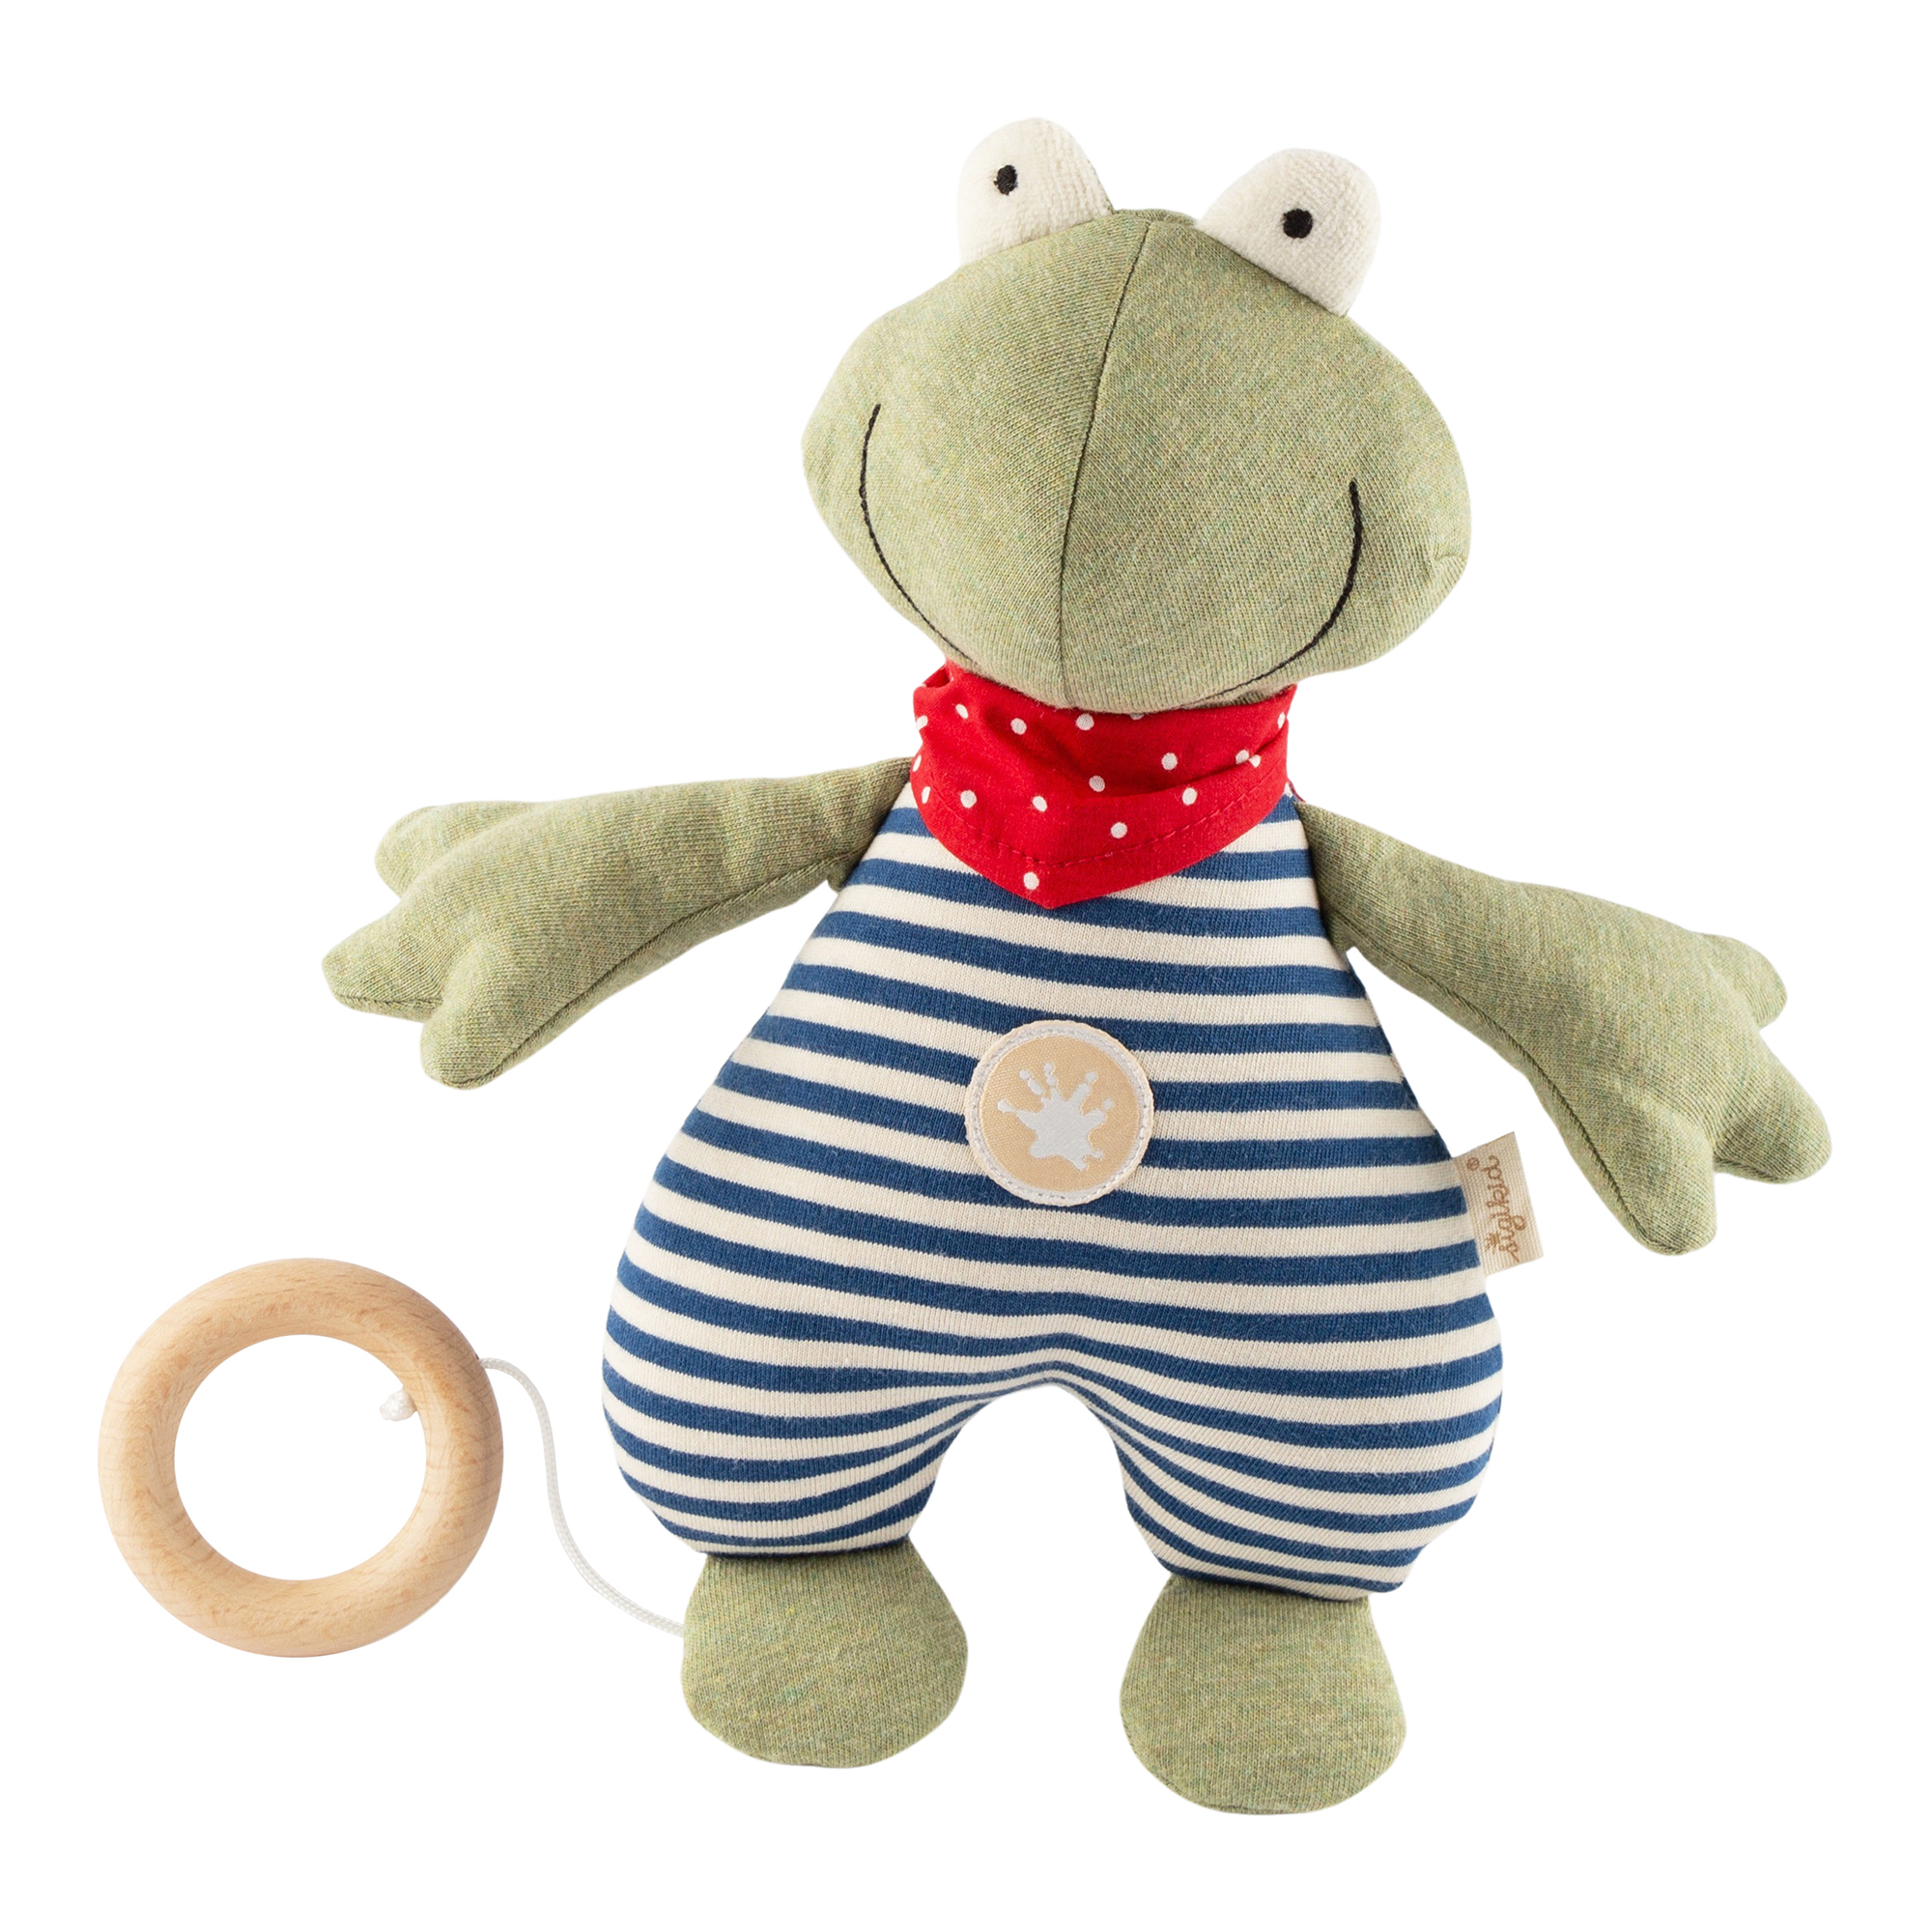 Musical soft toy frog, cotton jersey